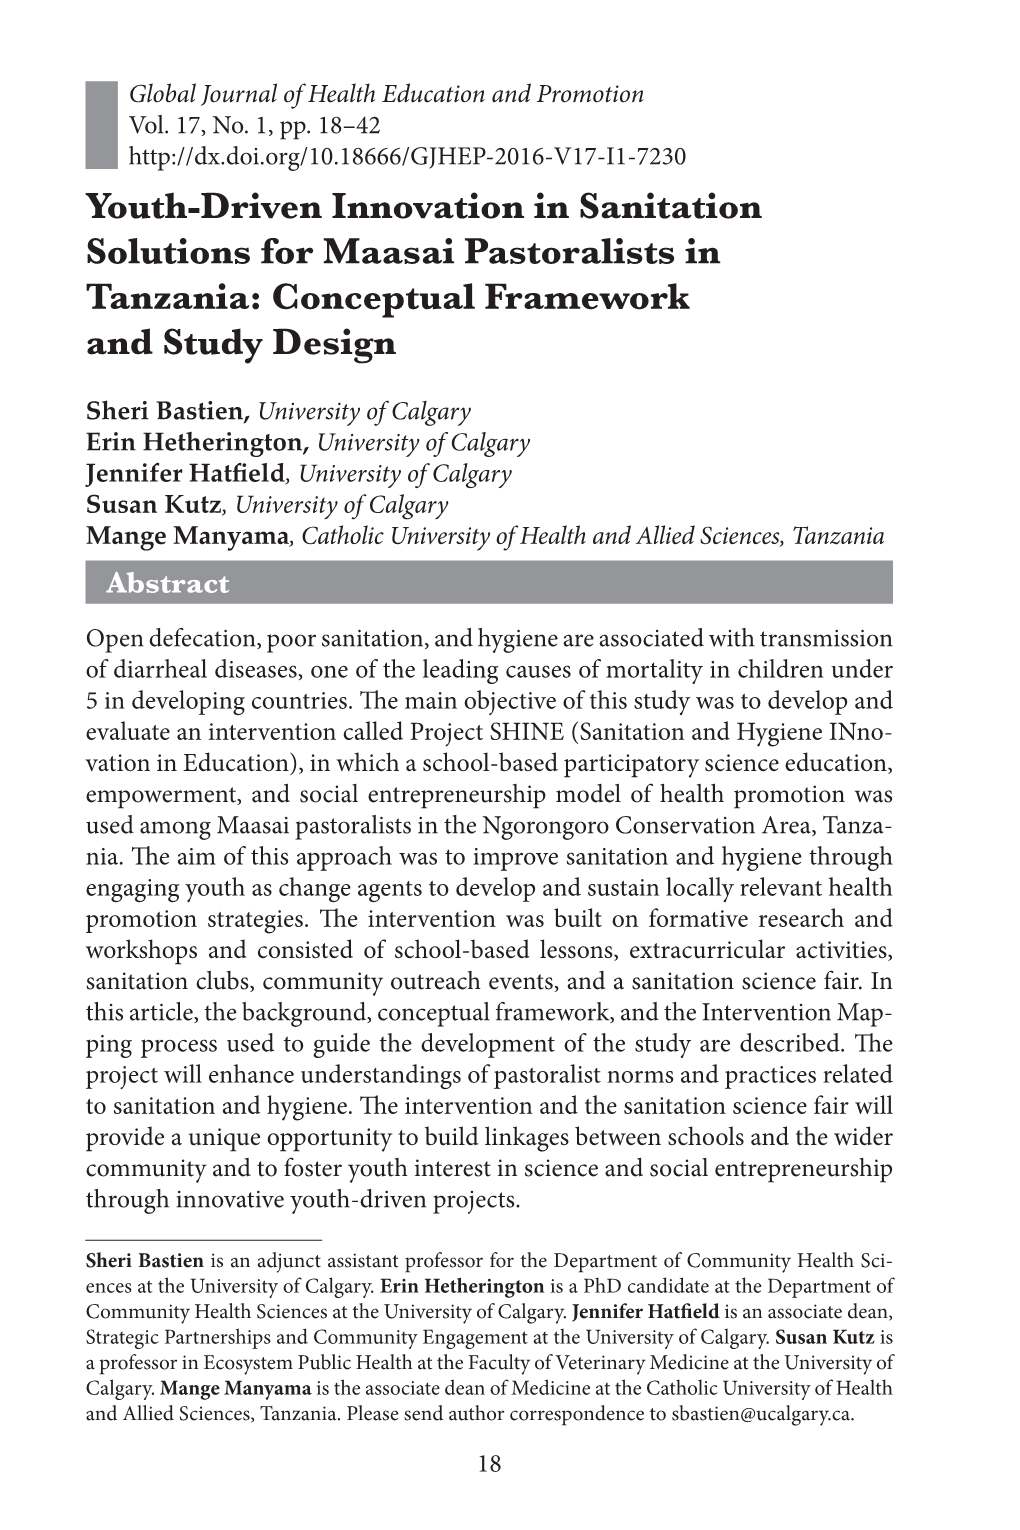 Youth-Driven Innovation in Sanitation Solutions for Maasai Pastoralists in Tanzania: Conceptual Framework and Study Design